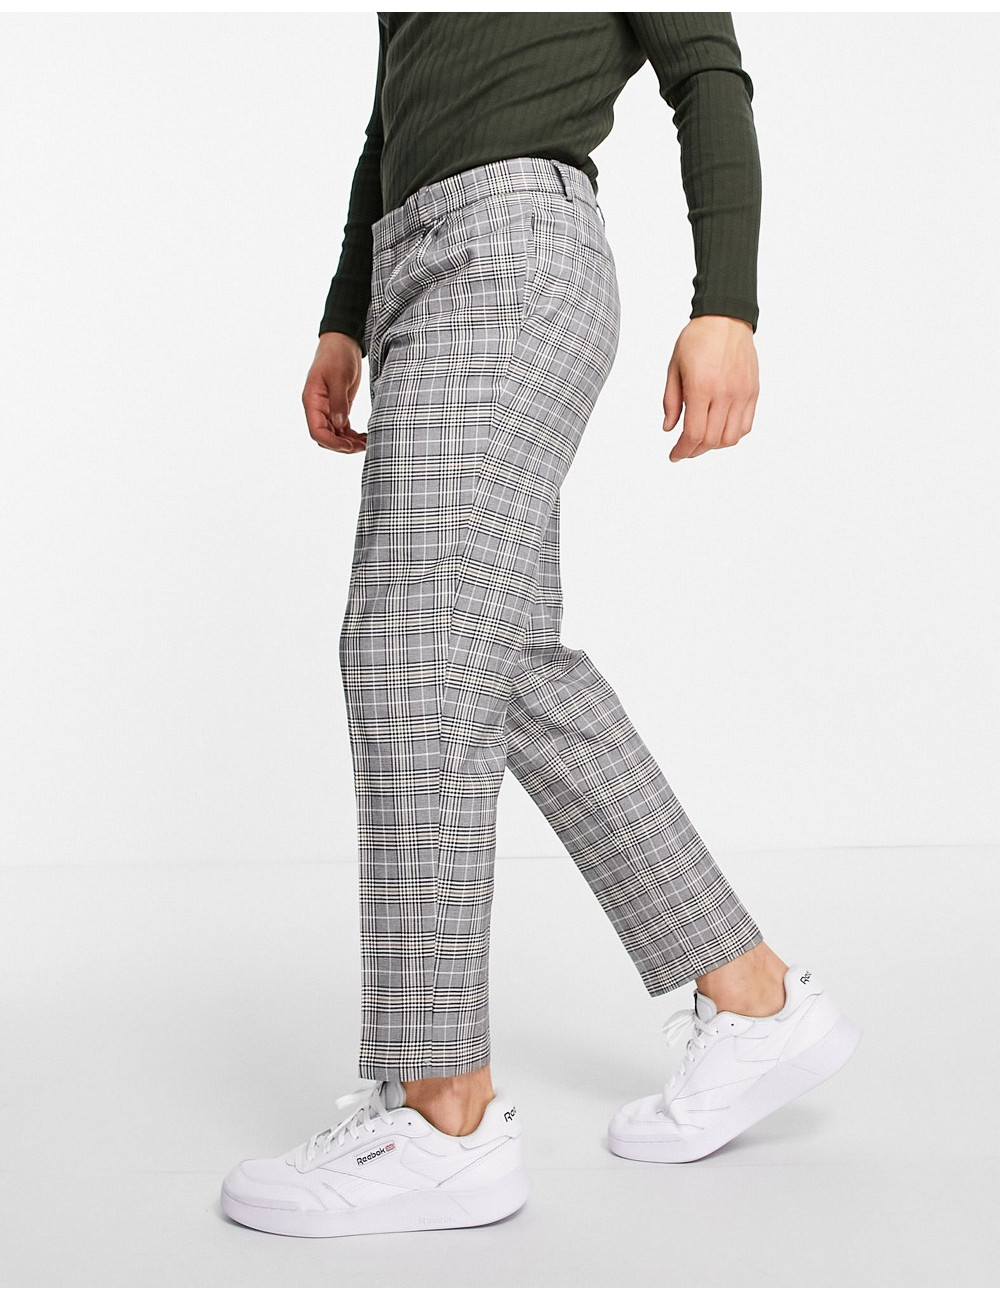 River Island tapered smart...